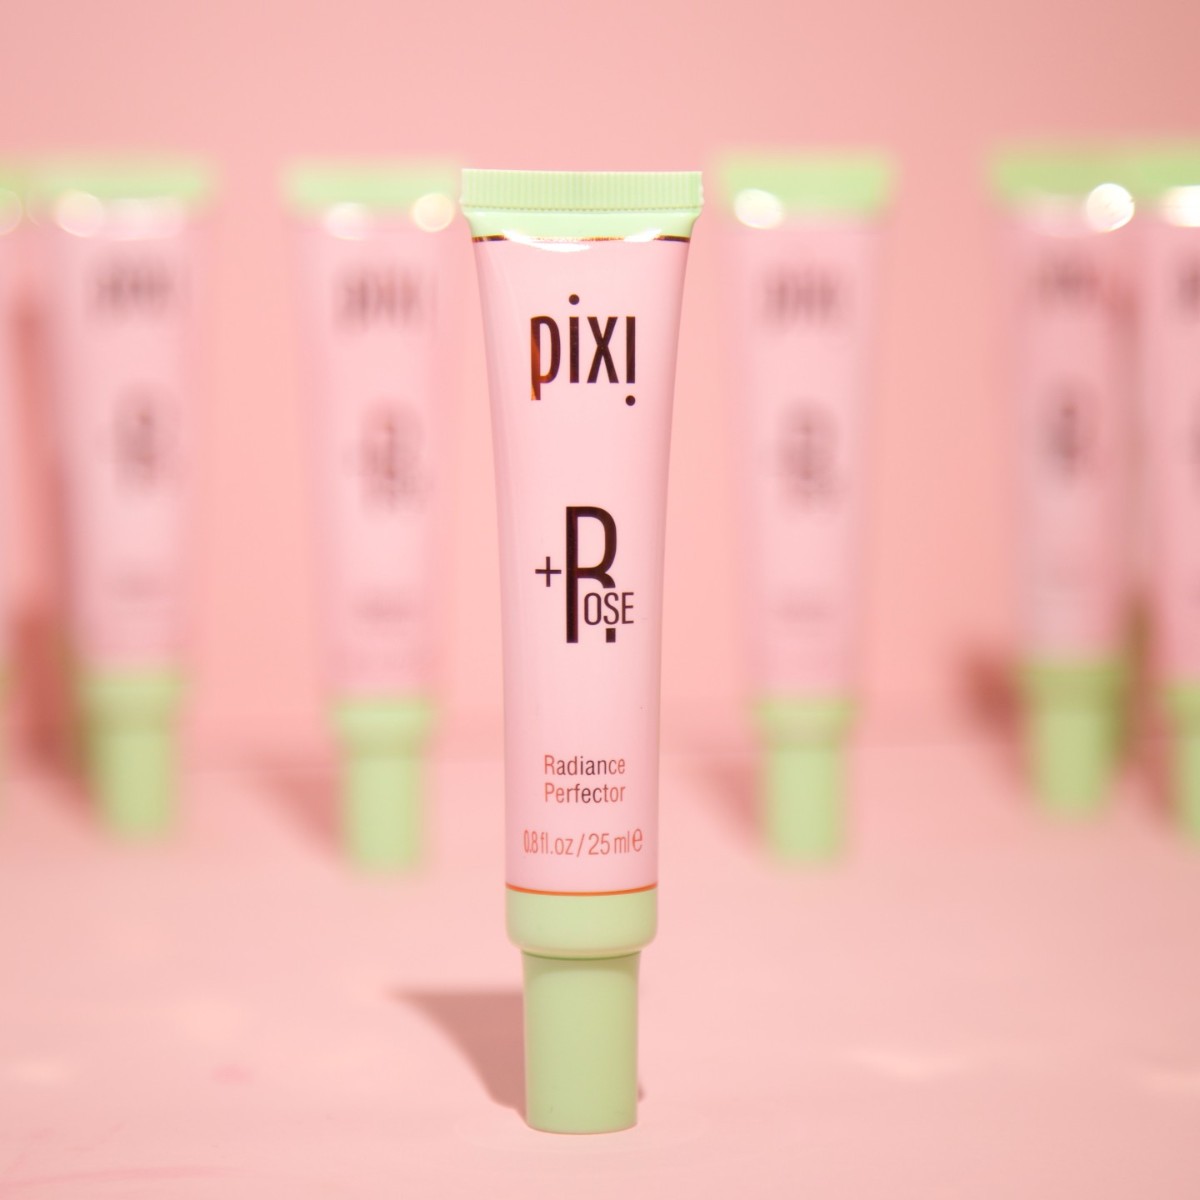 Achieve pearlescent skin-perfection with our +Rose Radiance Perfector! 🌹 This hydrating radiance lotion is infused with the following #PixiPerfect ingredients to always care as you wear: 🌹 Rose Water 🌹 Ceramide NP 🌹 Hyaluronic Acid #PixiBeauty #PixiGlow #RoseRadiance